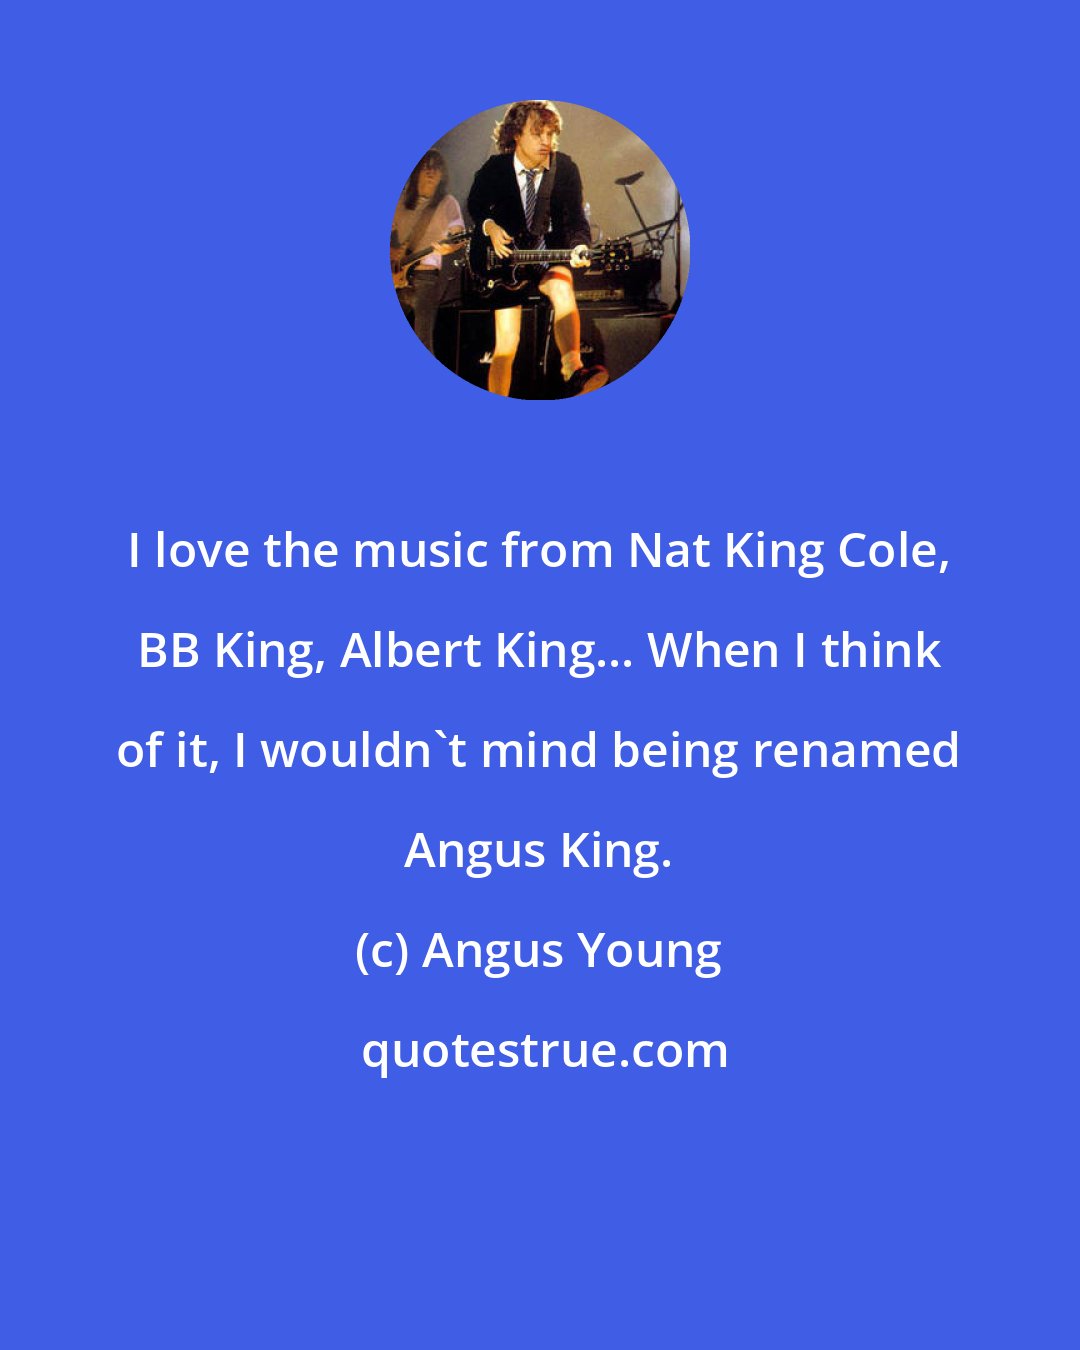 Angus Young: I love the music from Nat King Cole, BB King, Albert King... When I think of it, I wouldn't mind being renamed Angus King.